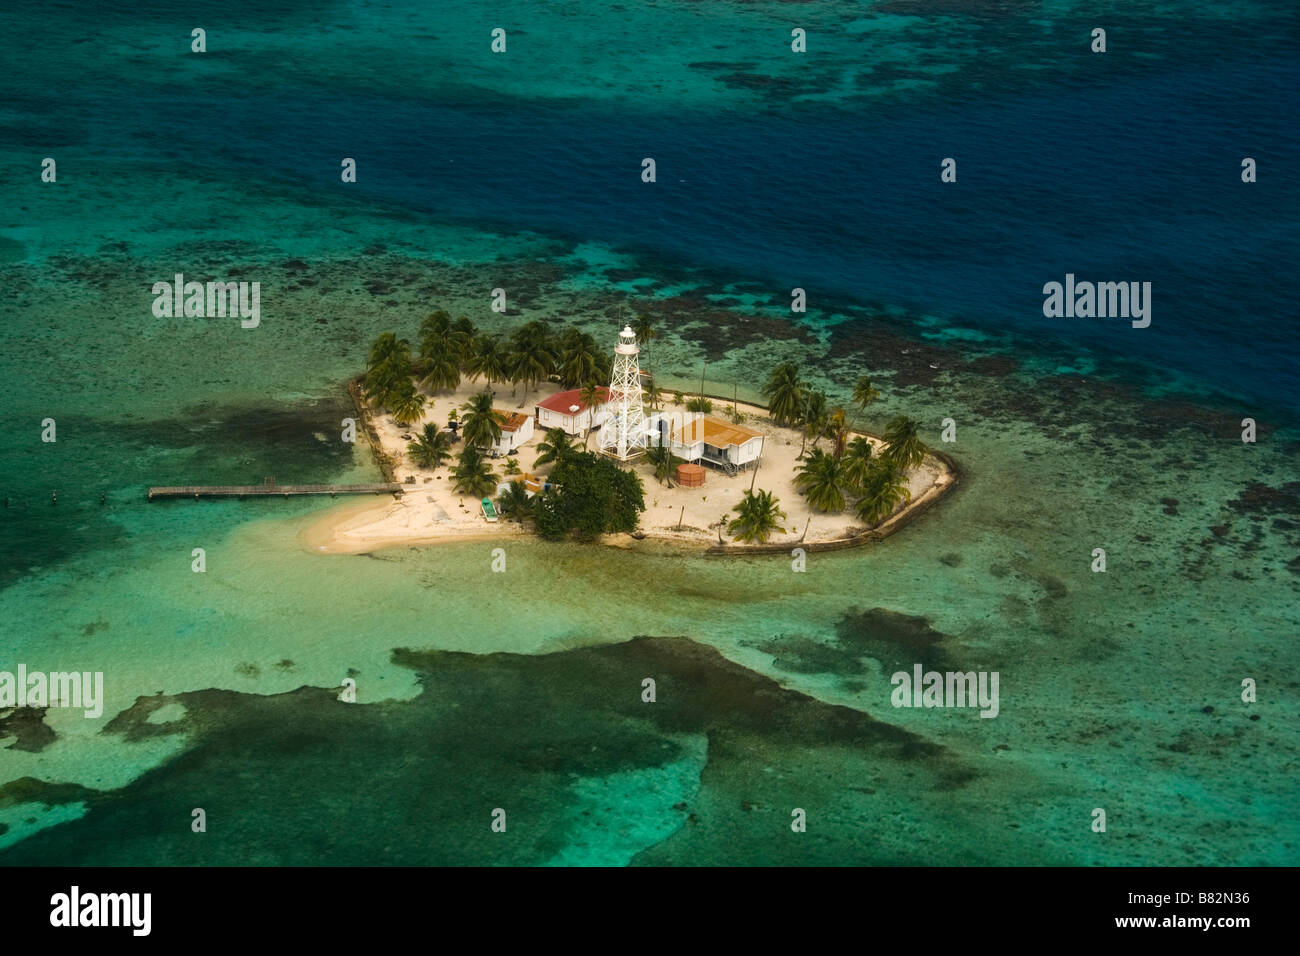 Aerial view Belize coral reefs and island, paradise, tropical island, atoll, white sand, palm trees, relax, vacation Stock Photo